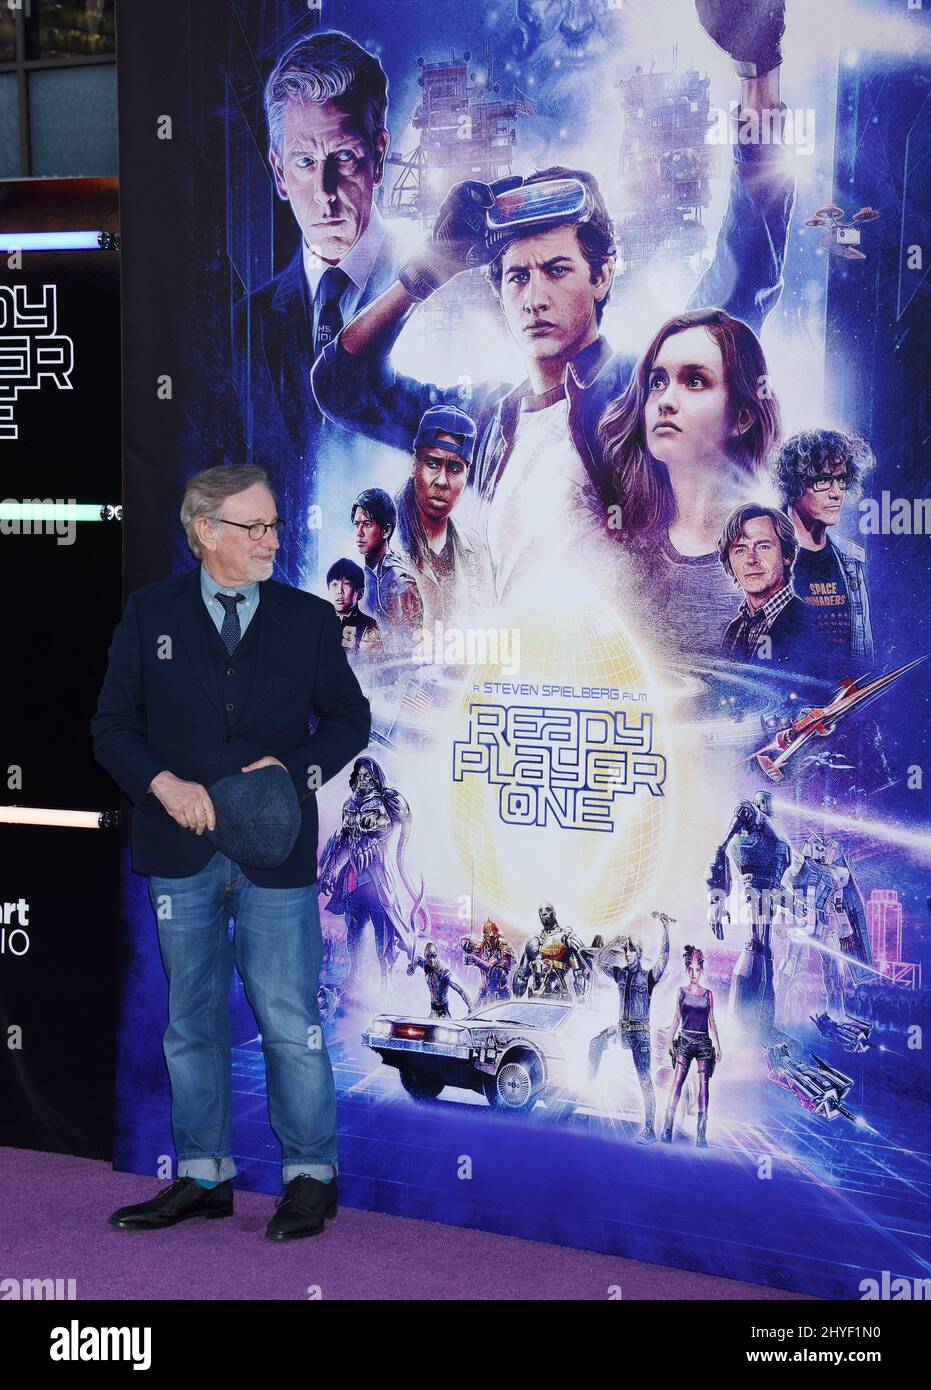 Ready Player One film review -- Not bad for a Spielberg film with a lot of  new licenses